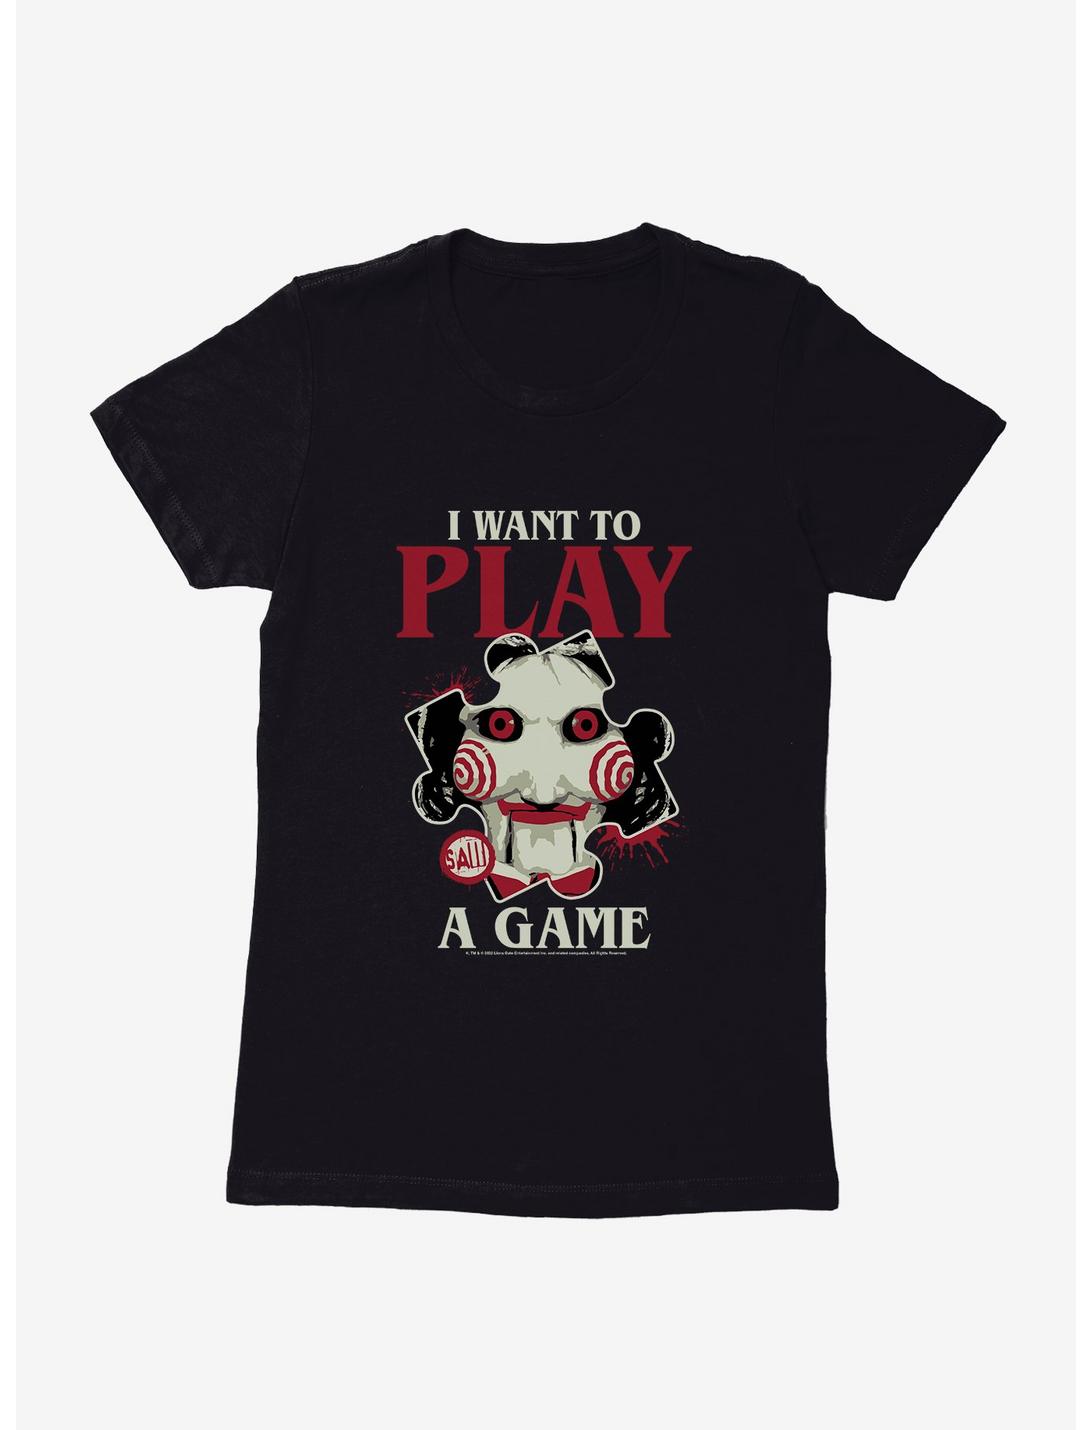 Saw I Want To Play A Game Womens T-Shirt, BLACK, hi-res